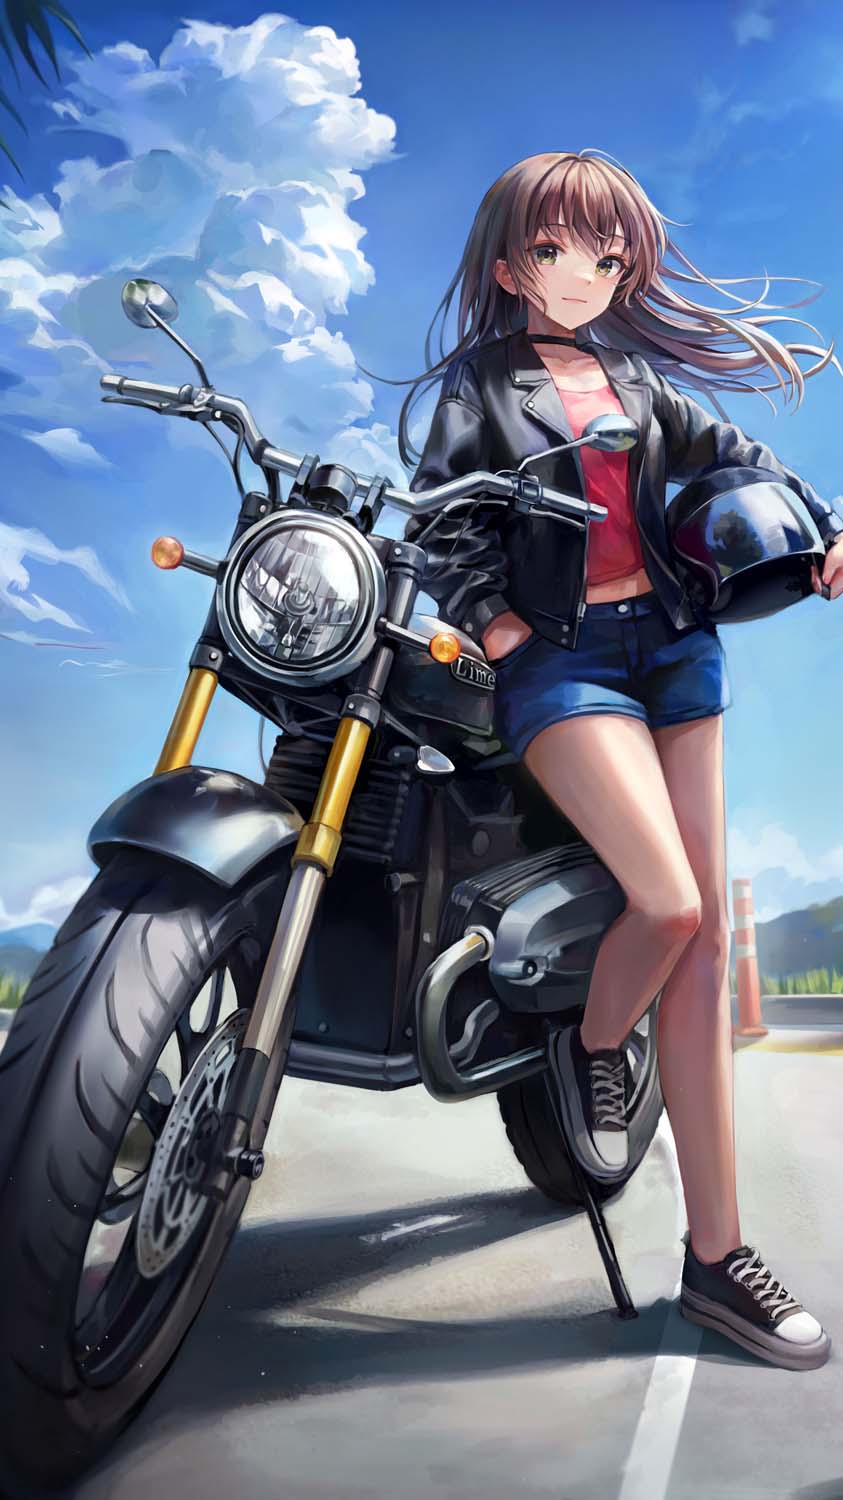 Anime girl and her motorcycle by MauryArt5 on DeviantArt